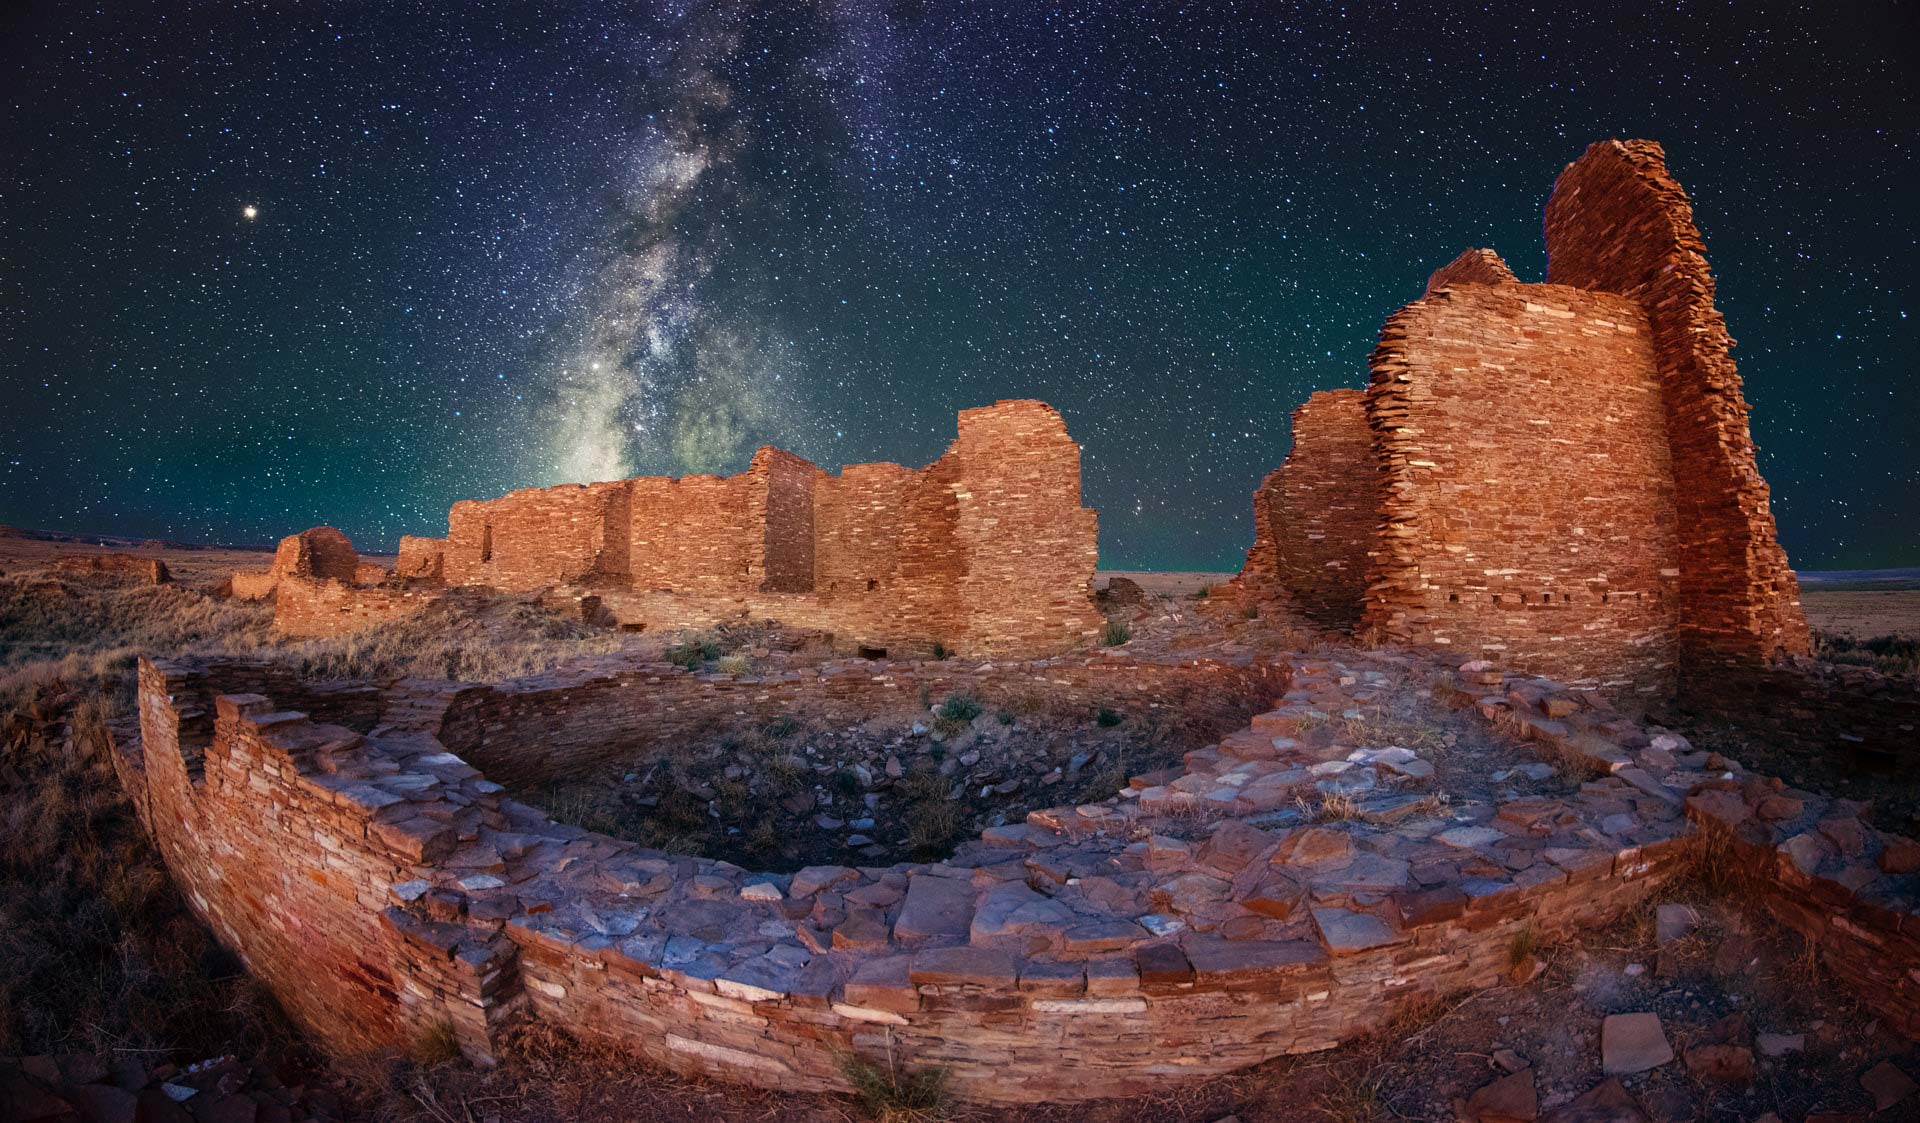 Image of ruins with the night sky and milky way in the background